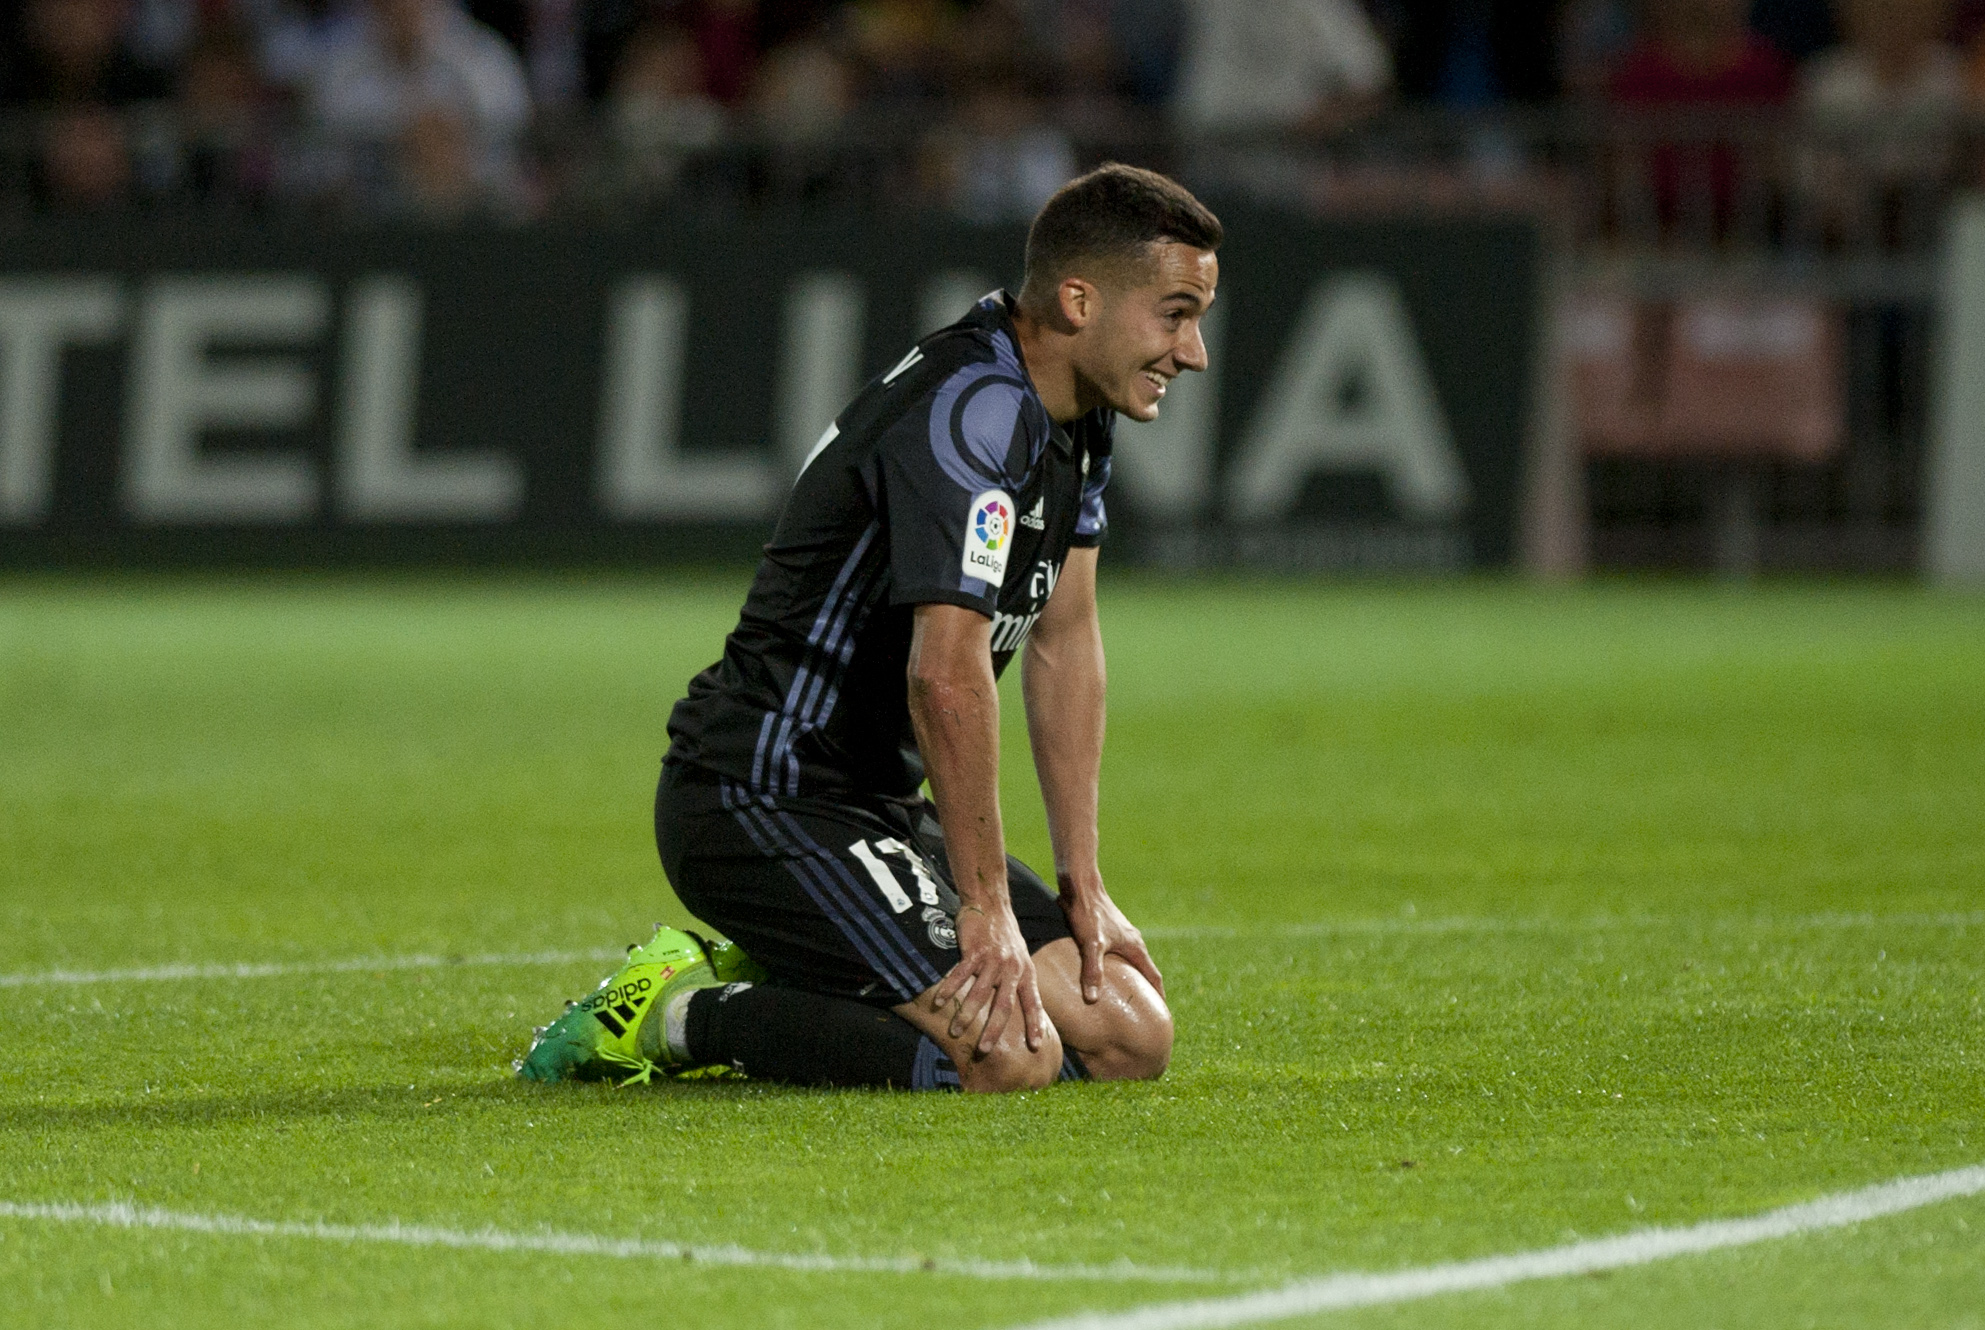 Real Madrid's forward Lucas Vazquez kneels on the field during the Spanish league football match Granada FC vs Real Madrid CF at Nuevo Los Carmenes stadium in Granada on May 6, 2017. / AFP PHOTO / SERGIO CAMACHO        (Photo credit should read SERGIO CAMACHO/AFP/Getty Images)